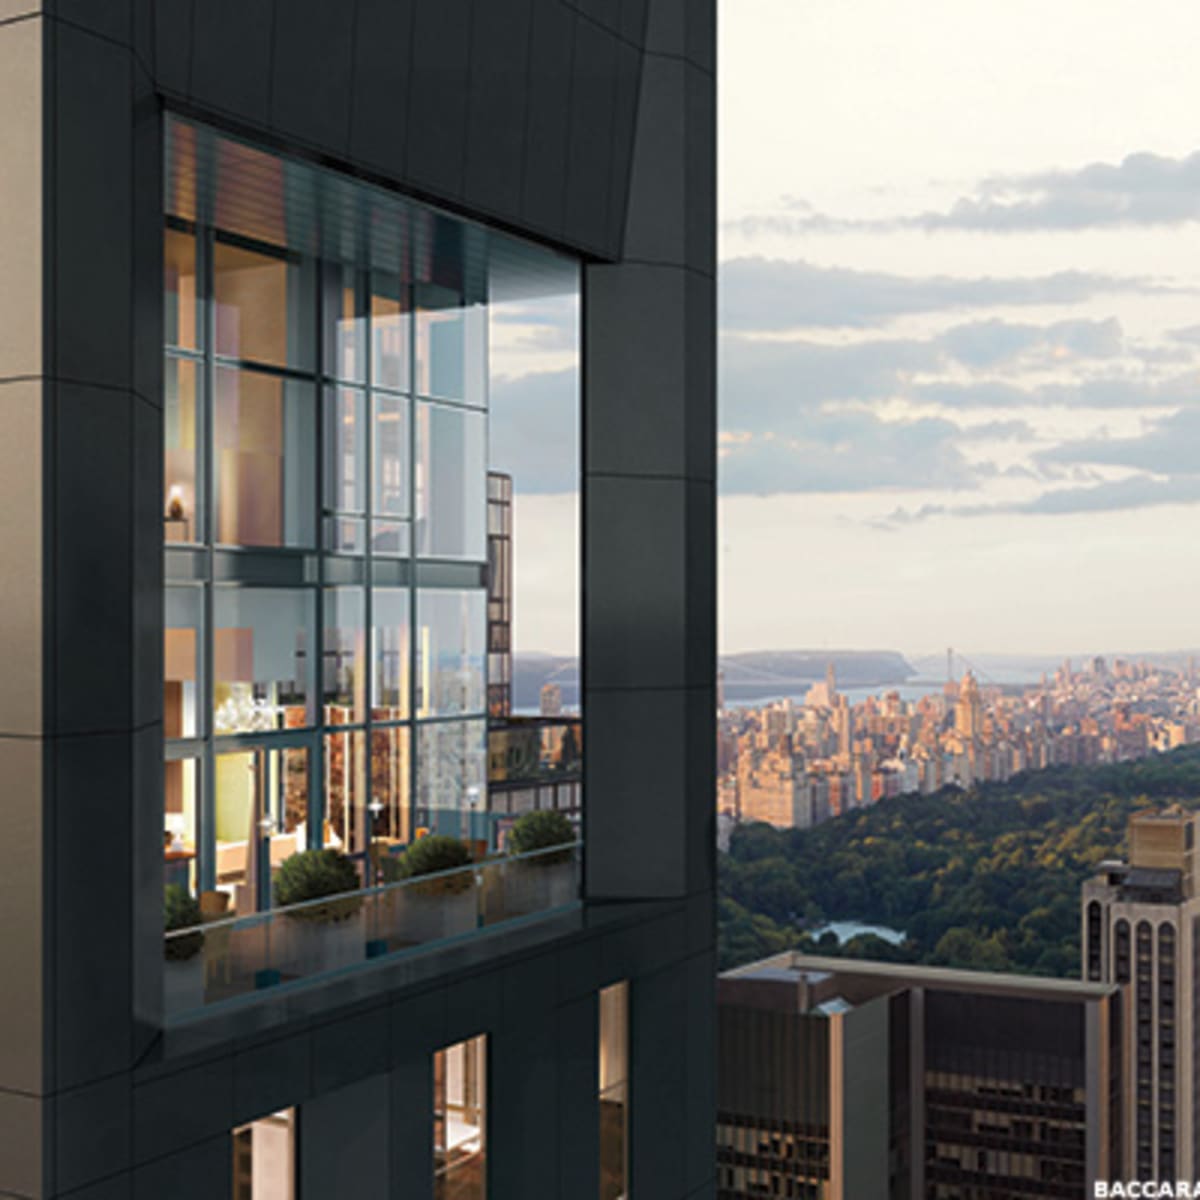 Baccarat Has Your $60 Million Penthouse in Manhattan - TheStreet